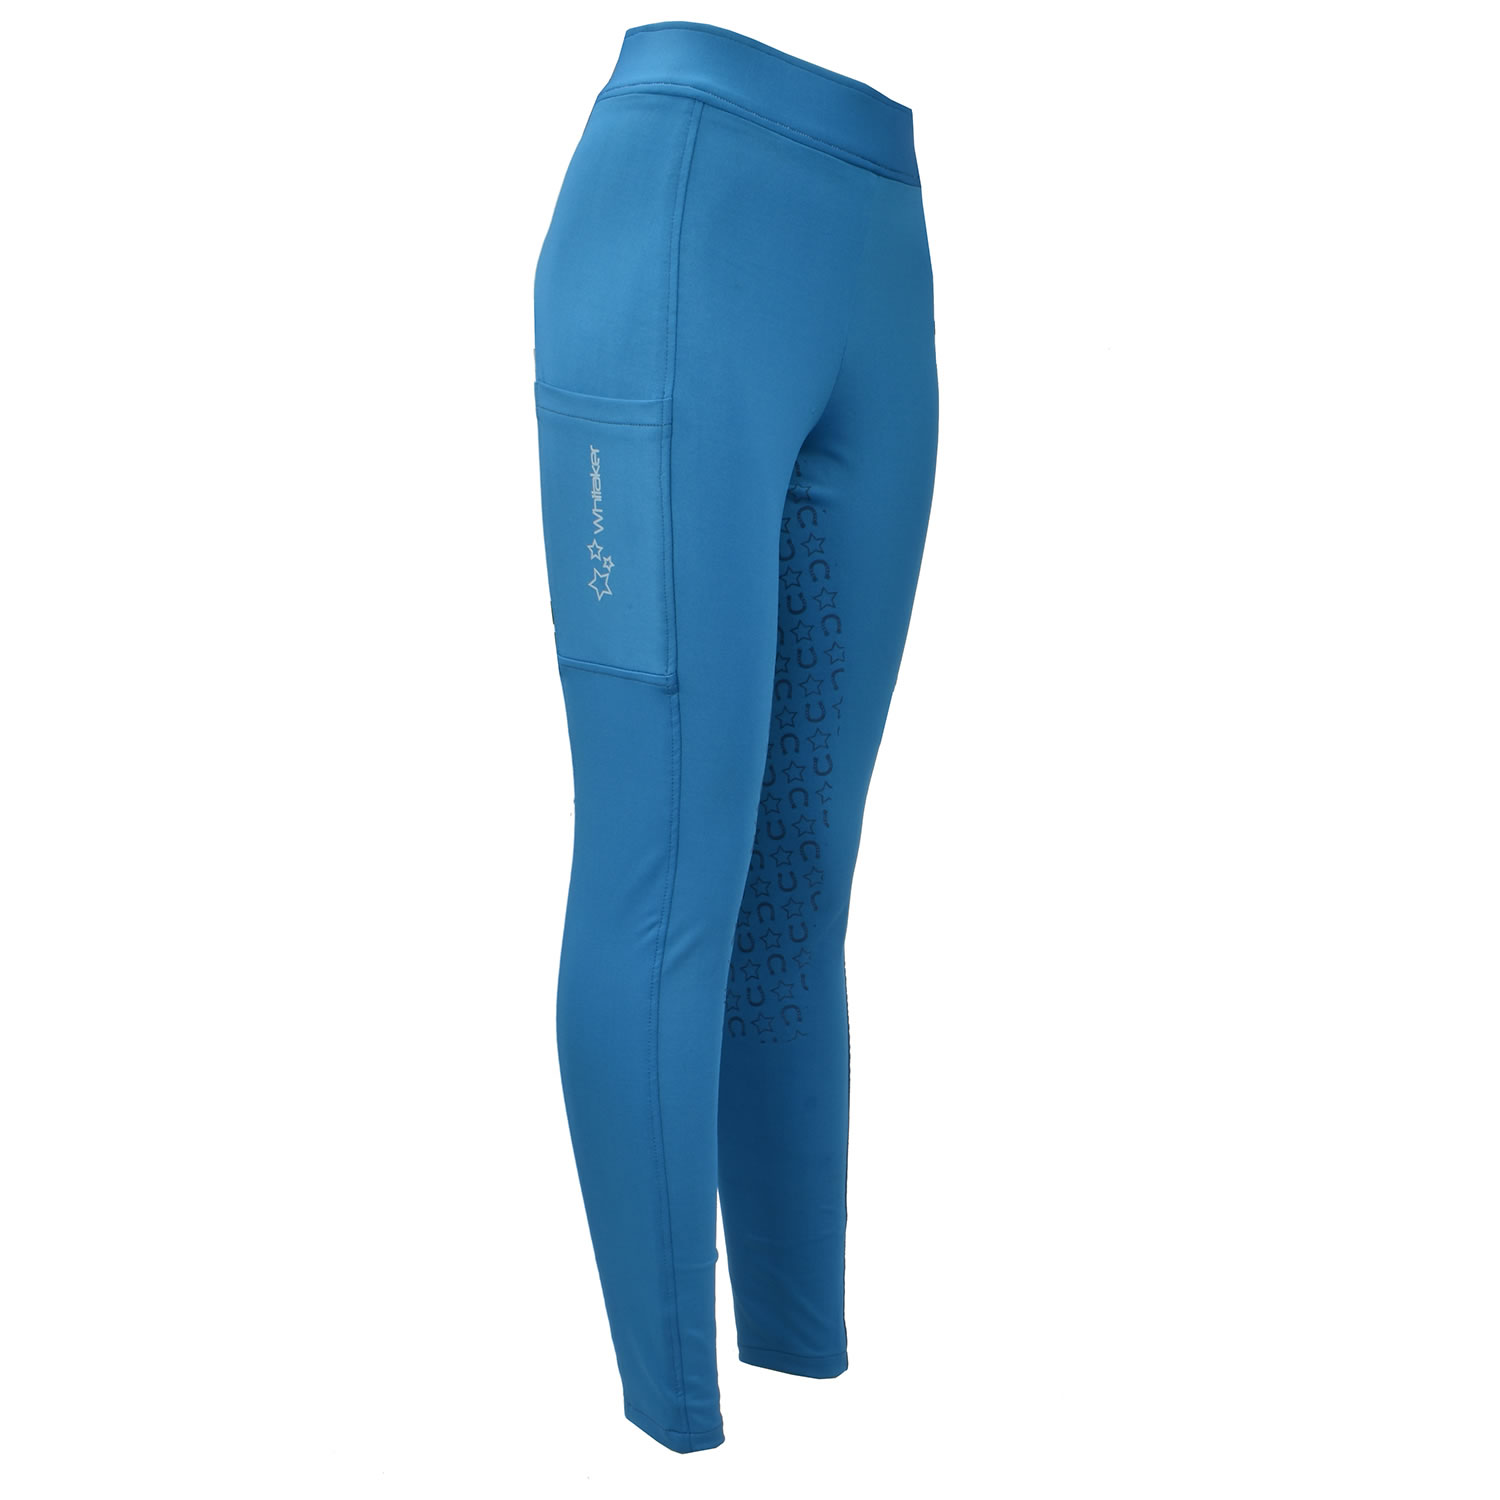 WHITAKER CLITHEROE RIDING TIGHTS CHILD BLUE  AGE 13 - 14 CHILD